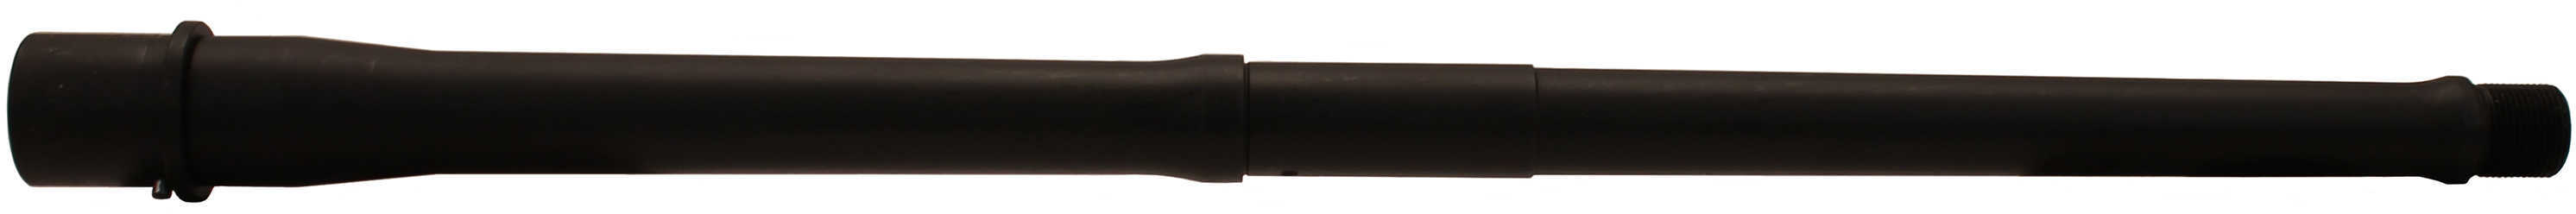 CMMG 30D120A Barrel Sub-Assembly 300 AAC Blackout/Whisper (7.62X35mm) 16.1" Nitrided